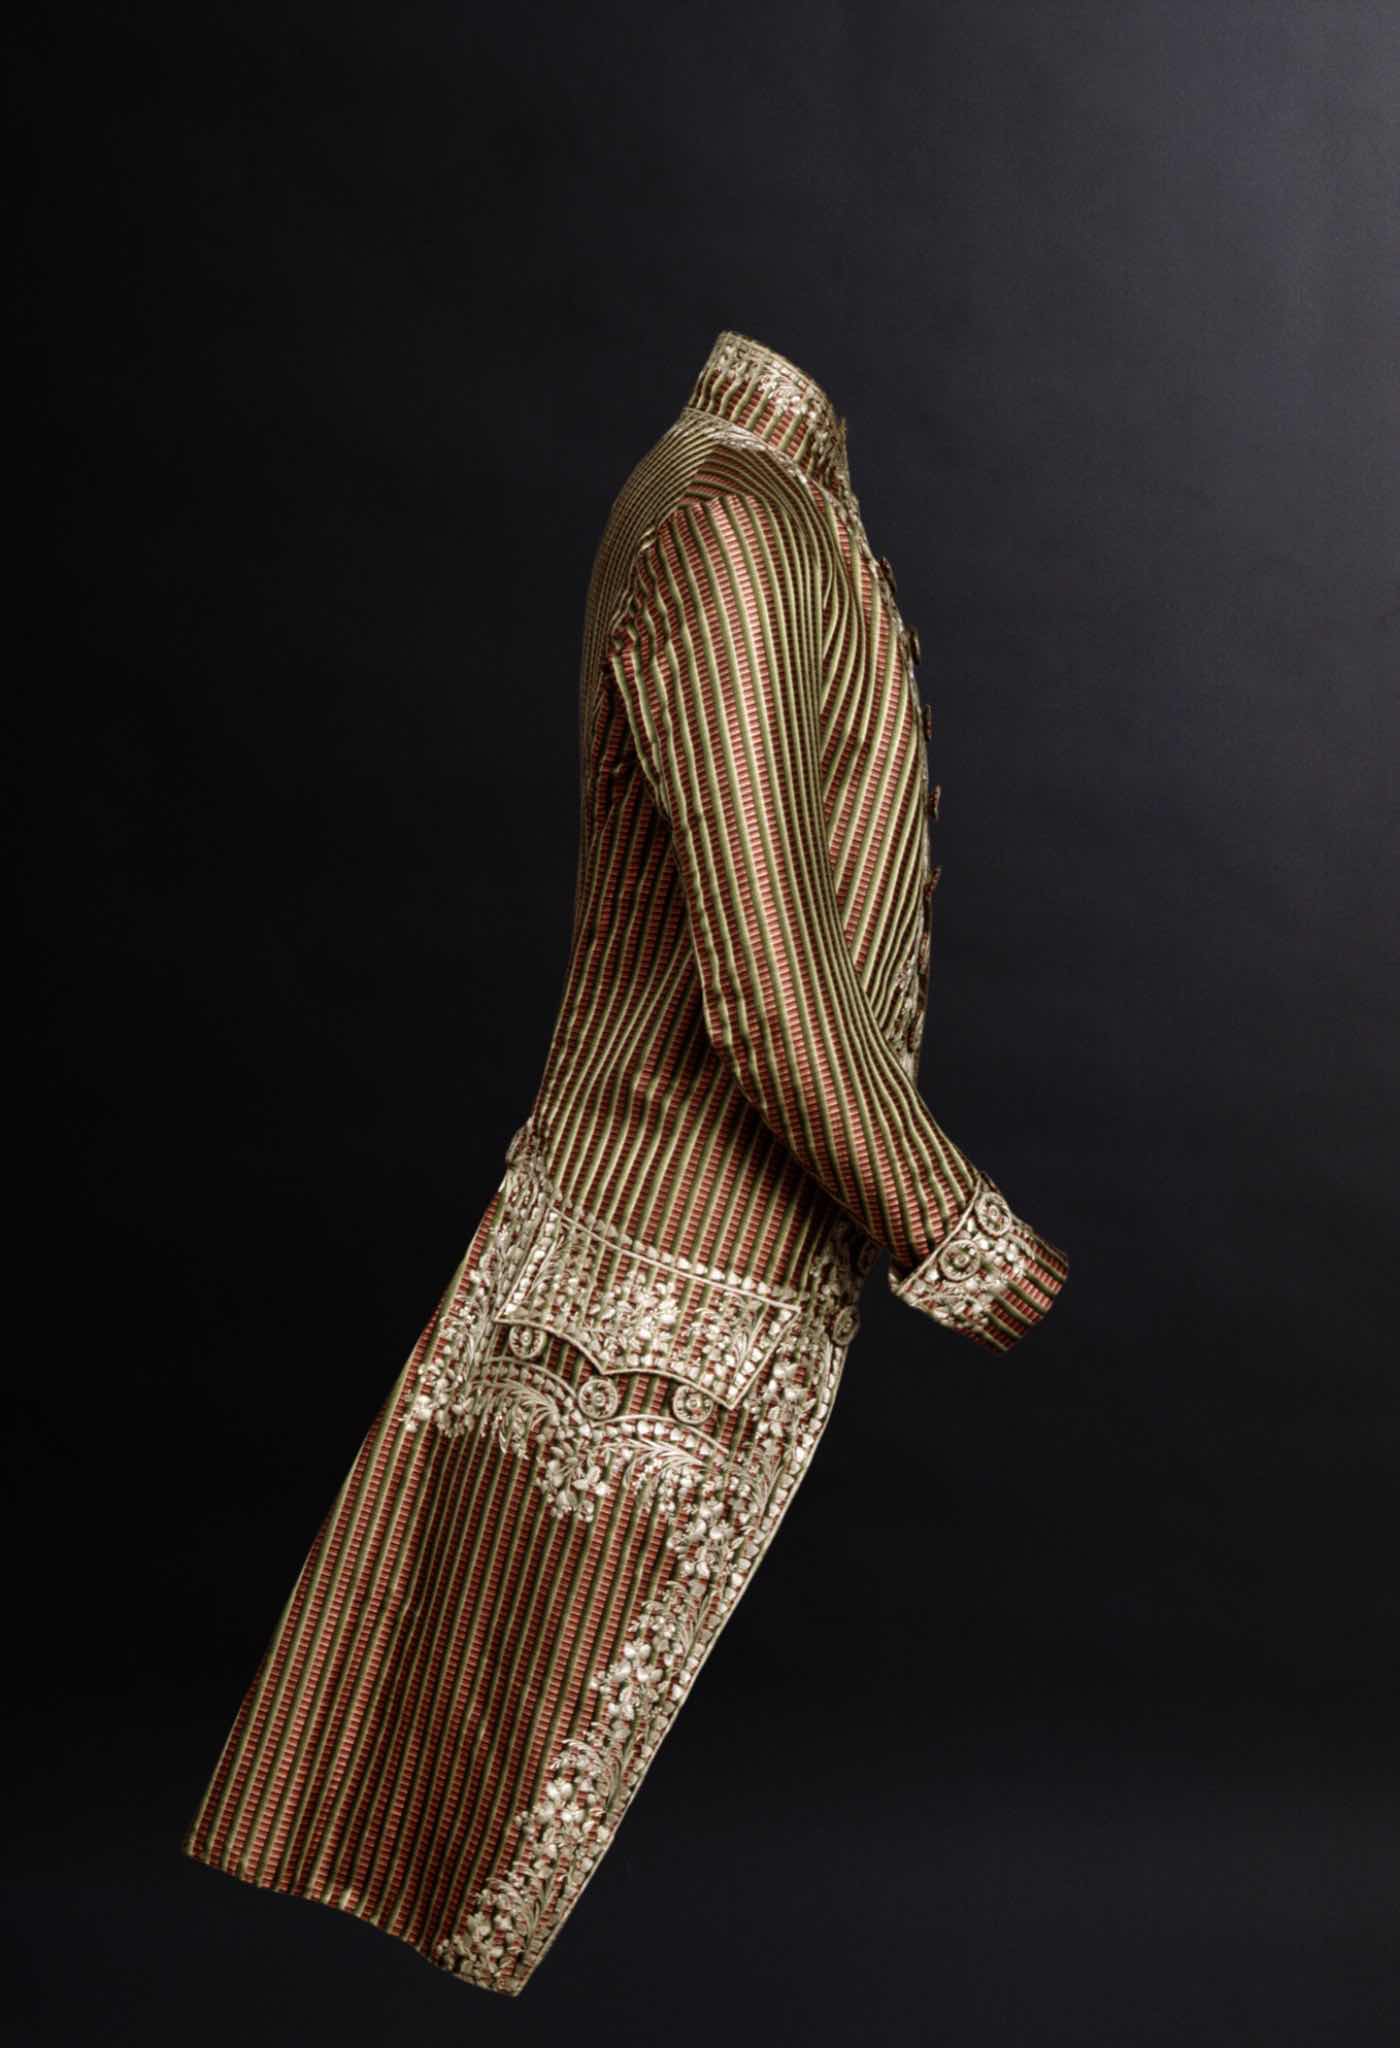 1996, Paris, France, from the collection of Musée Galliera, frock coat ...